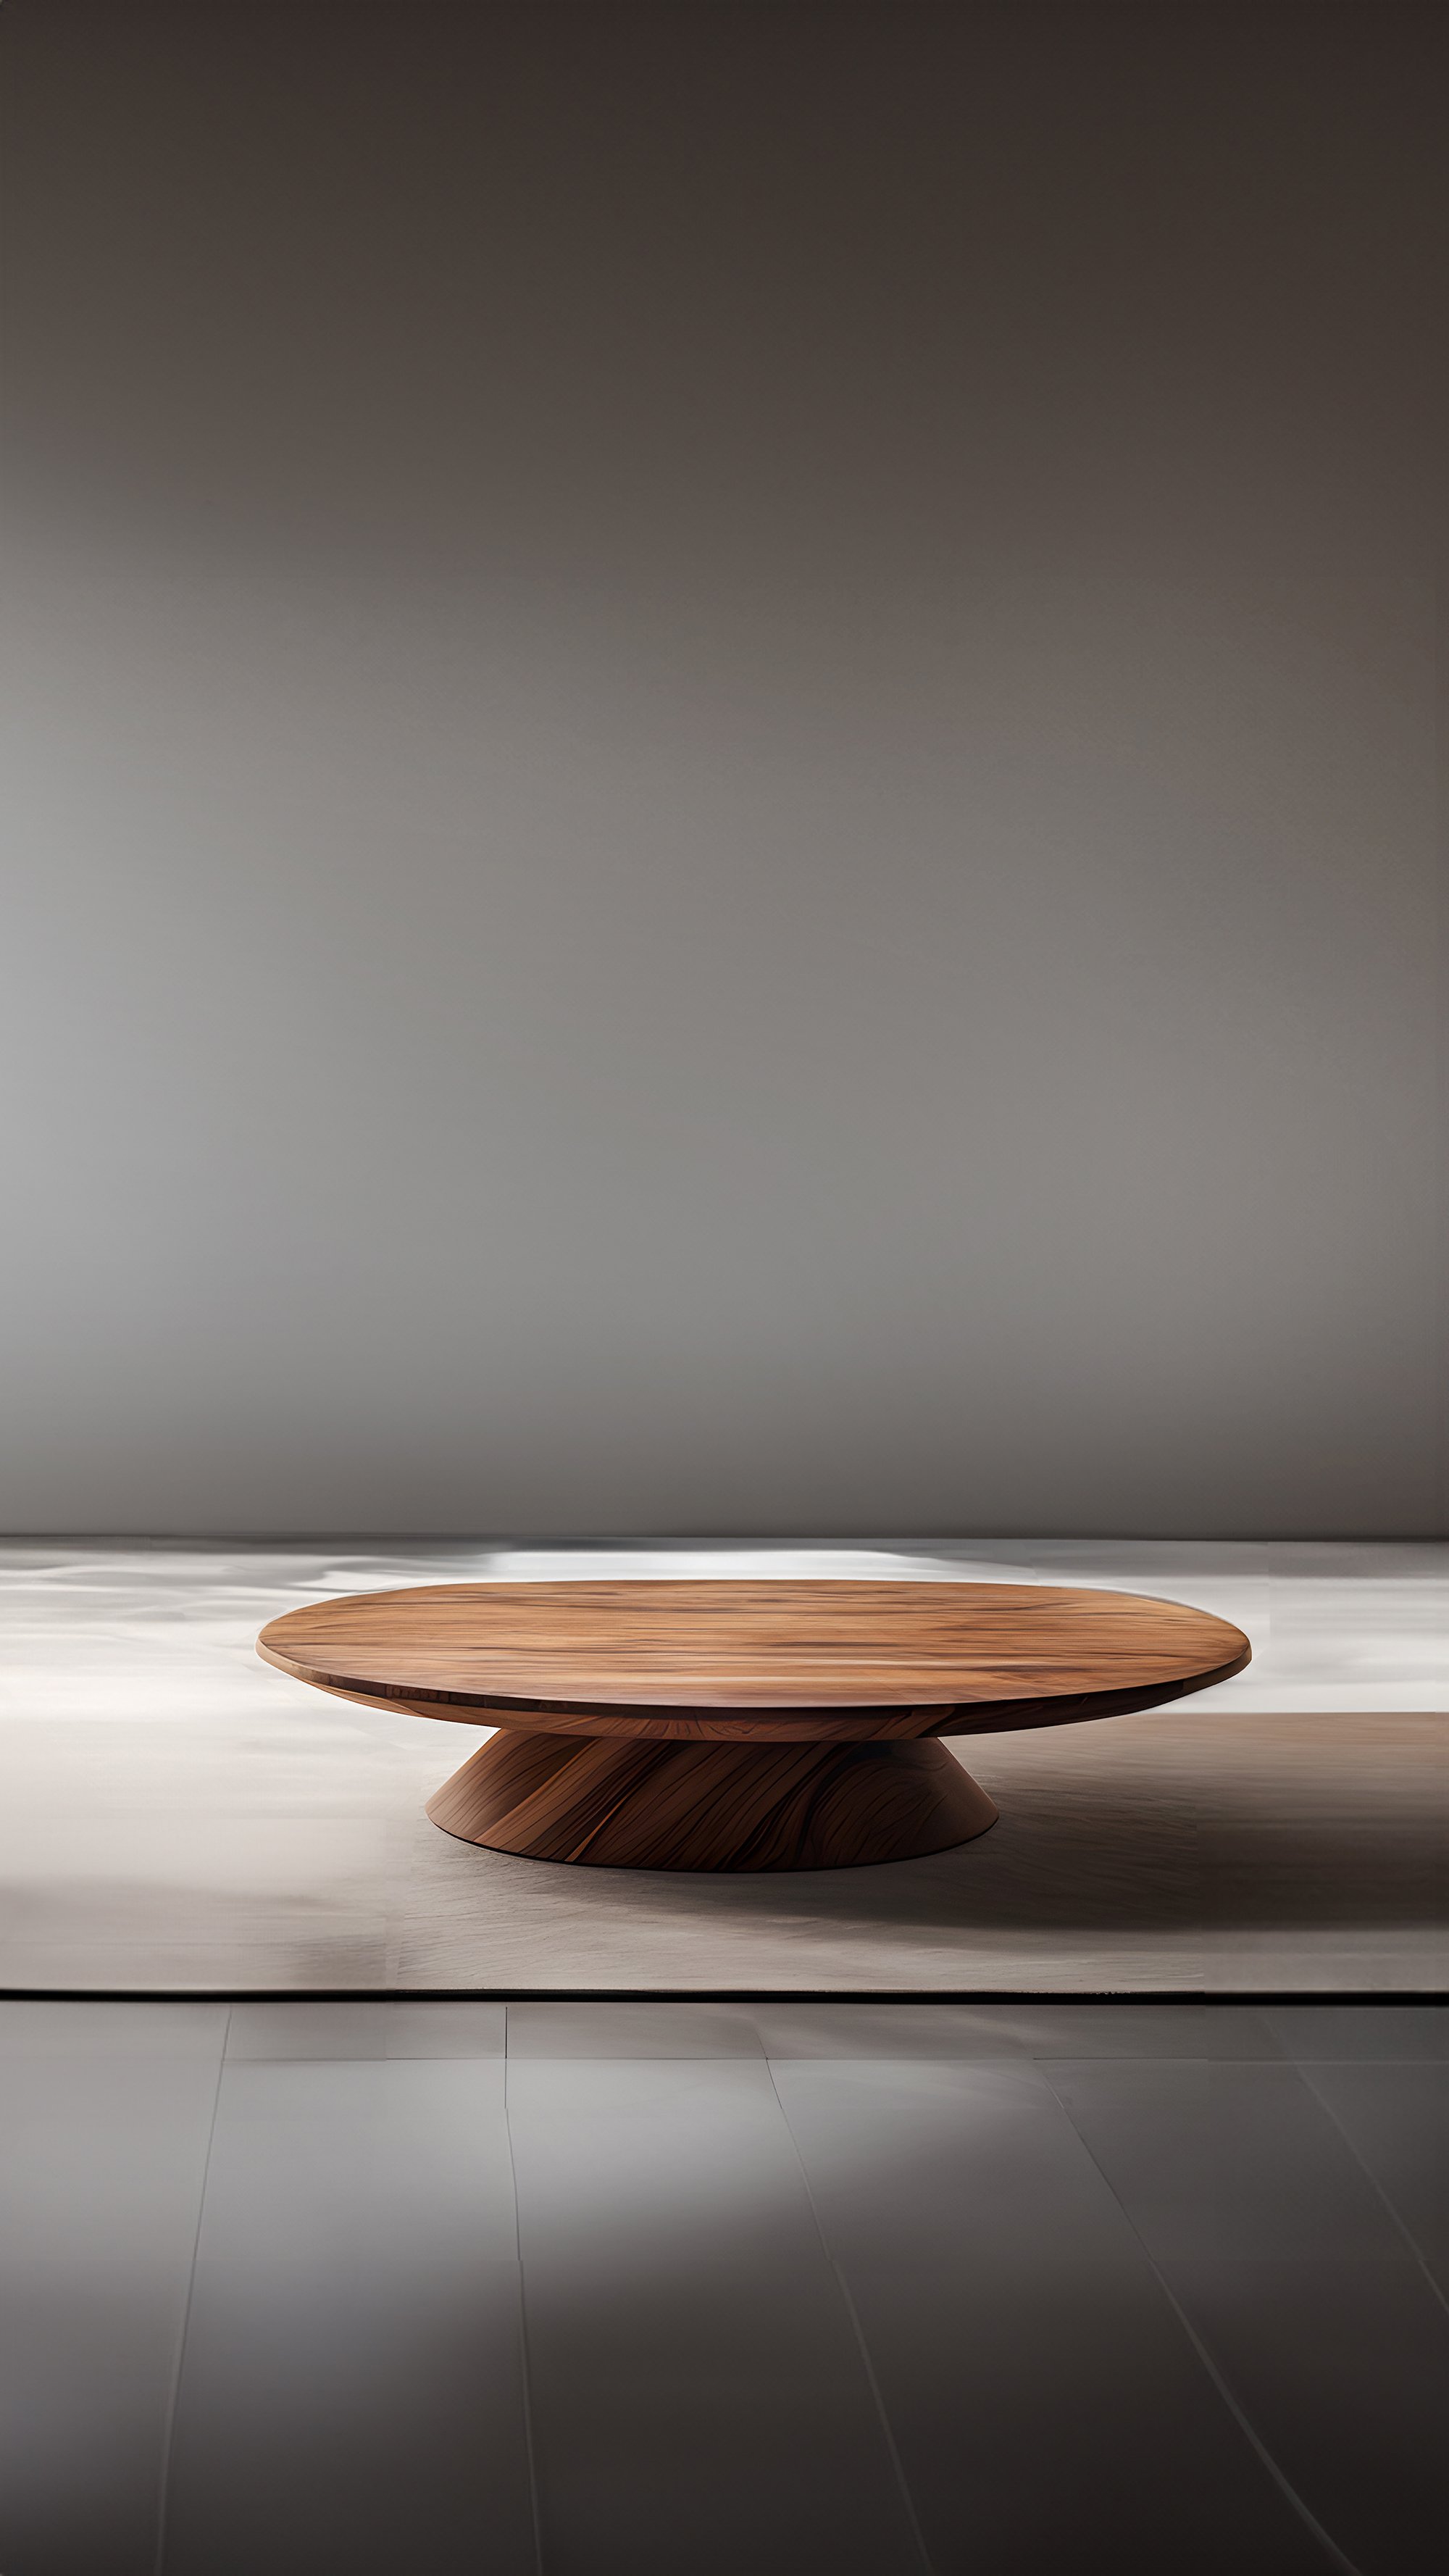 Sculptural Coffee Table Made of Solid Wood, Center Table Solace S48 by Joel Escalona — 8.jpg